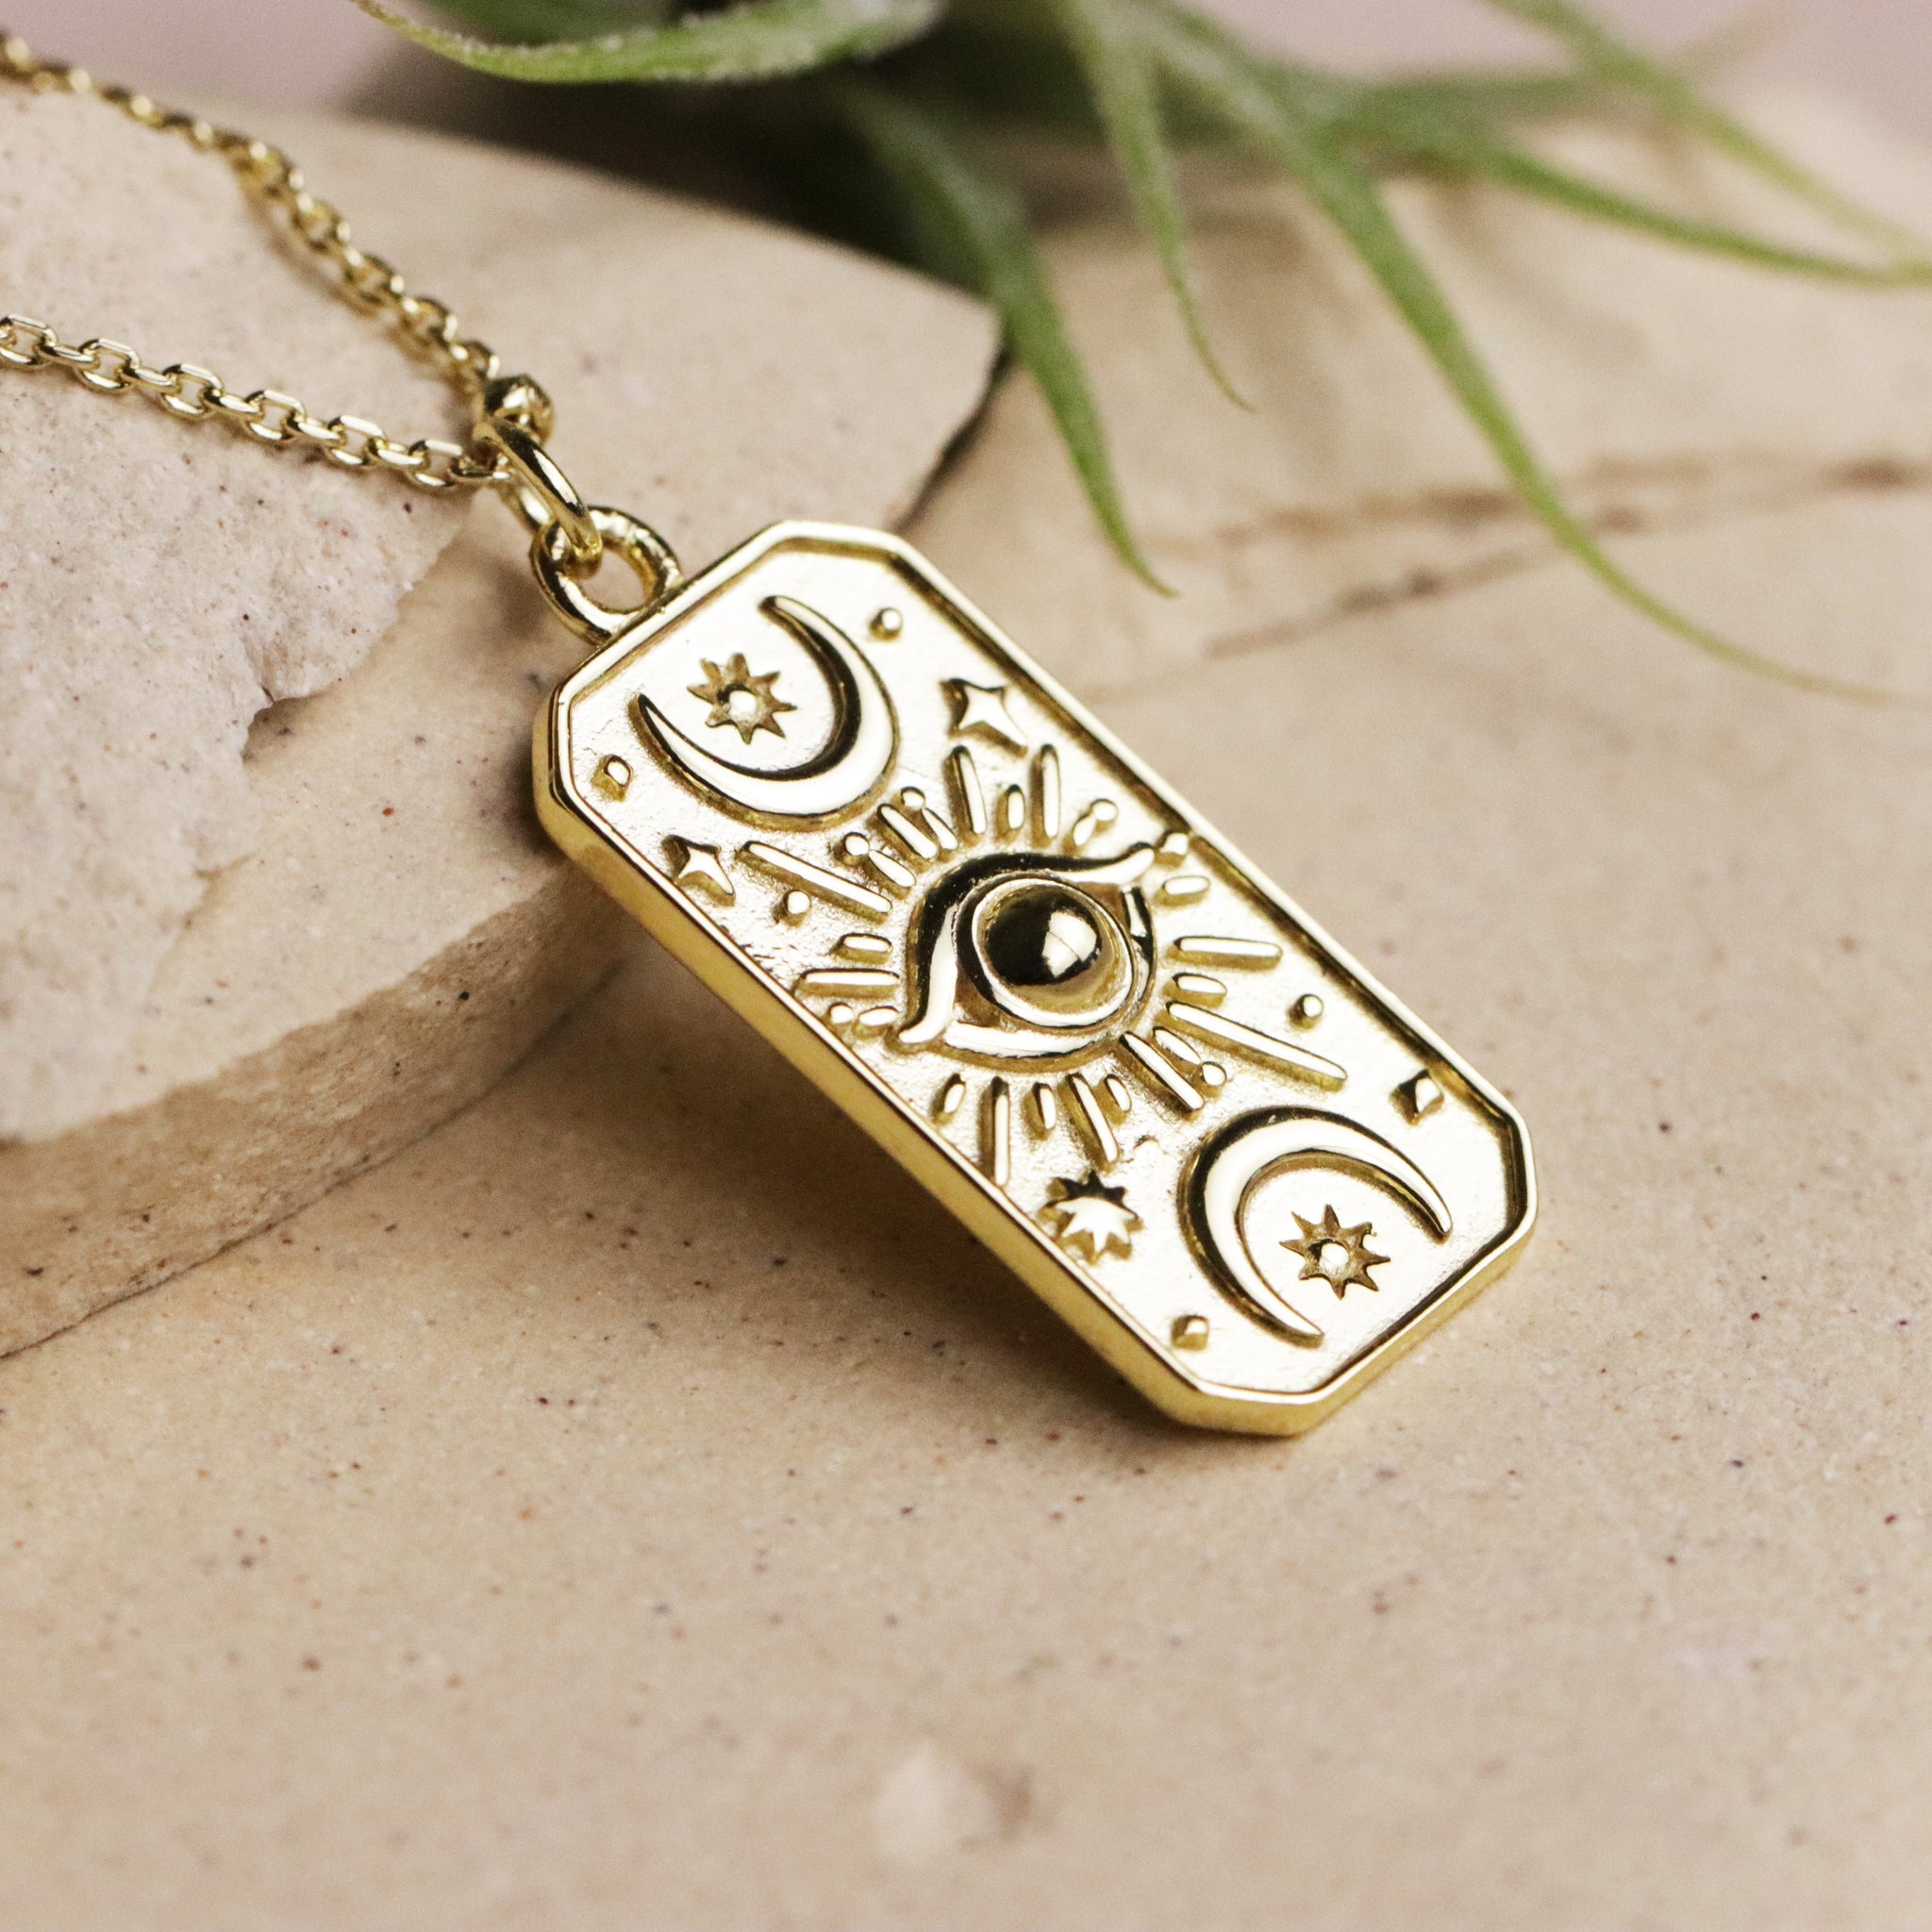 All Seeing Eye Tarot Necklace Pendant by La Lovely